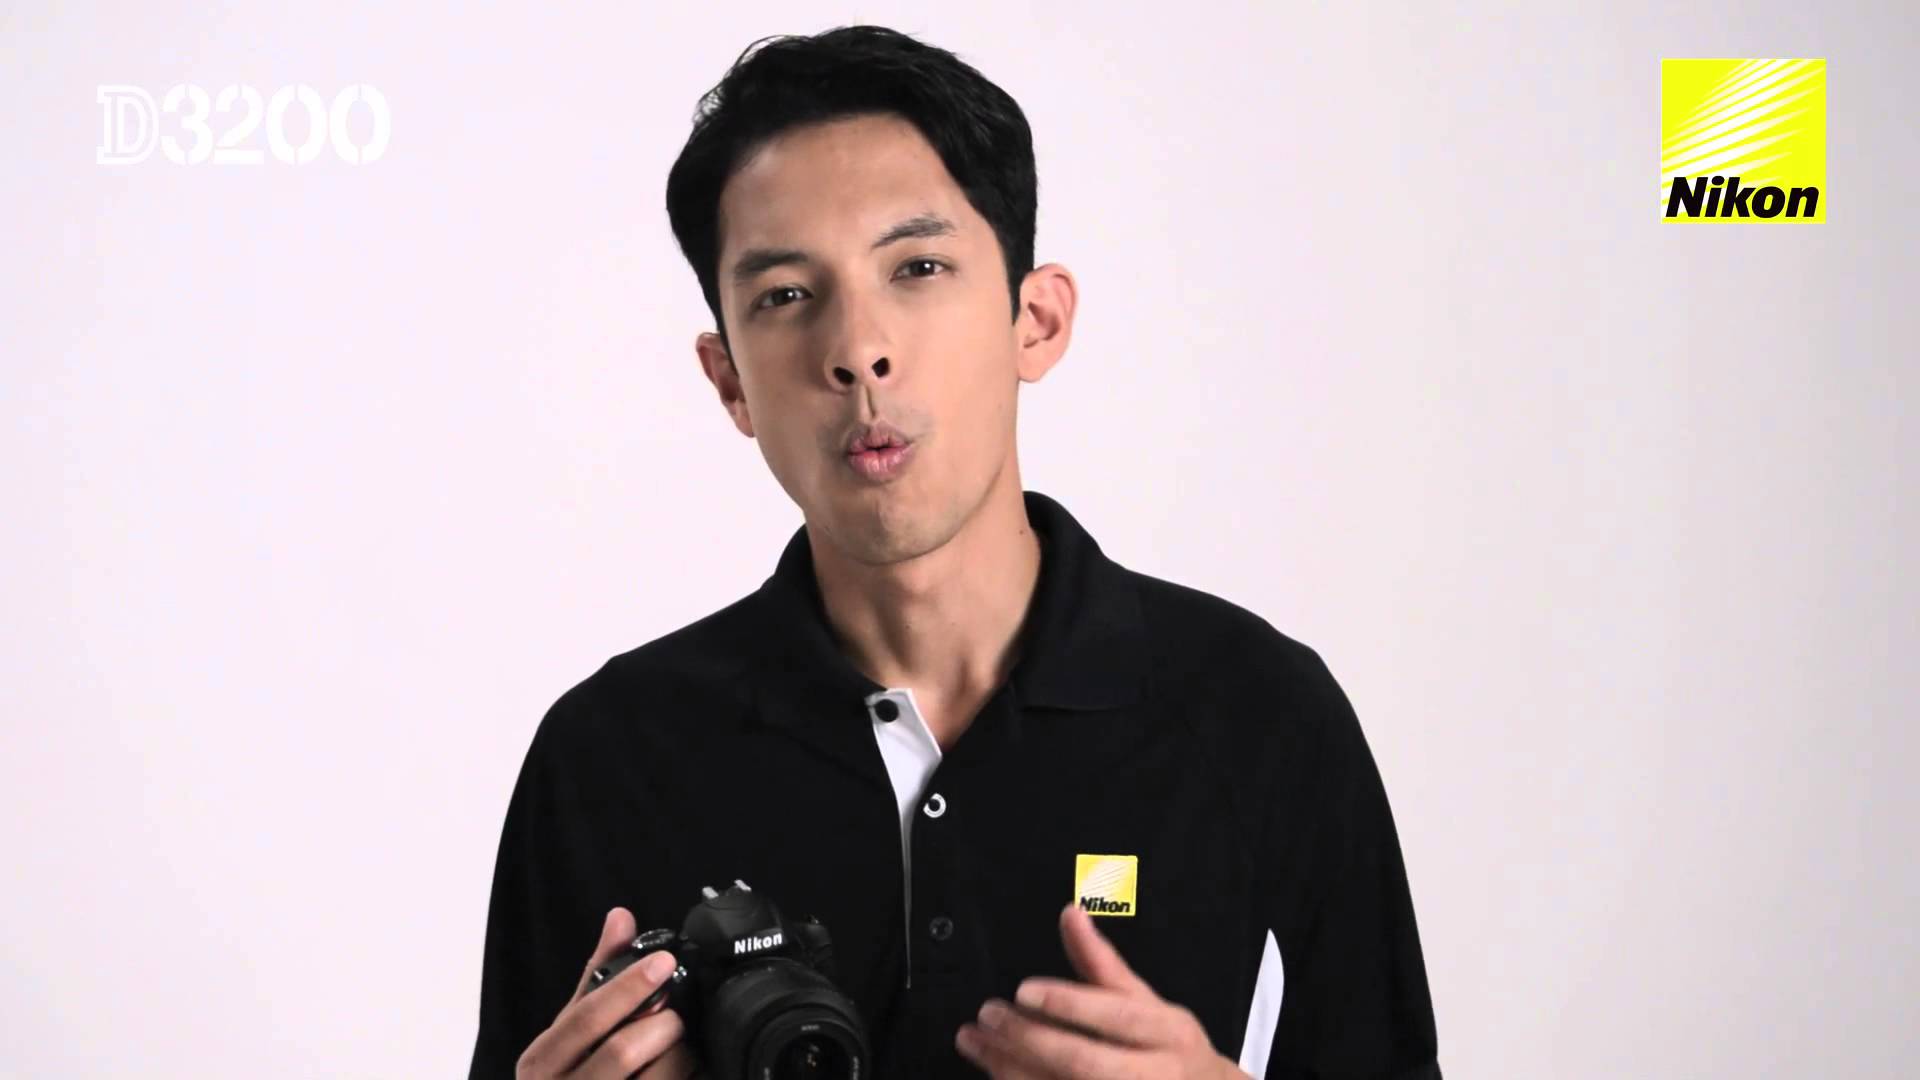 How-To Video Series: HD Video with the Nikon D3200 HD-SLR Camera